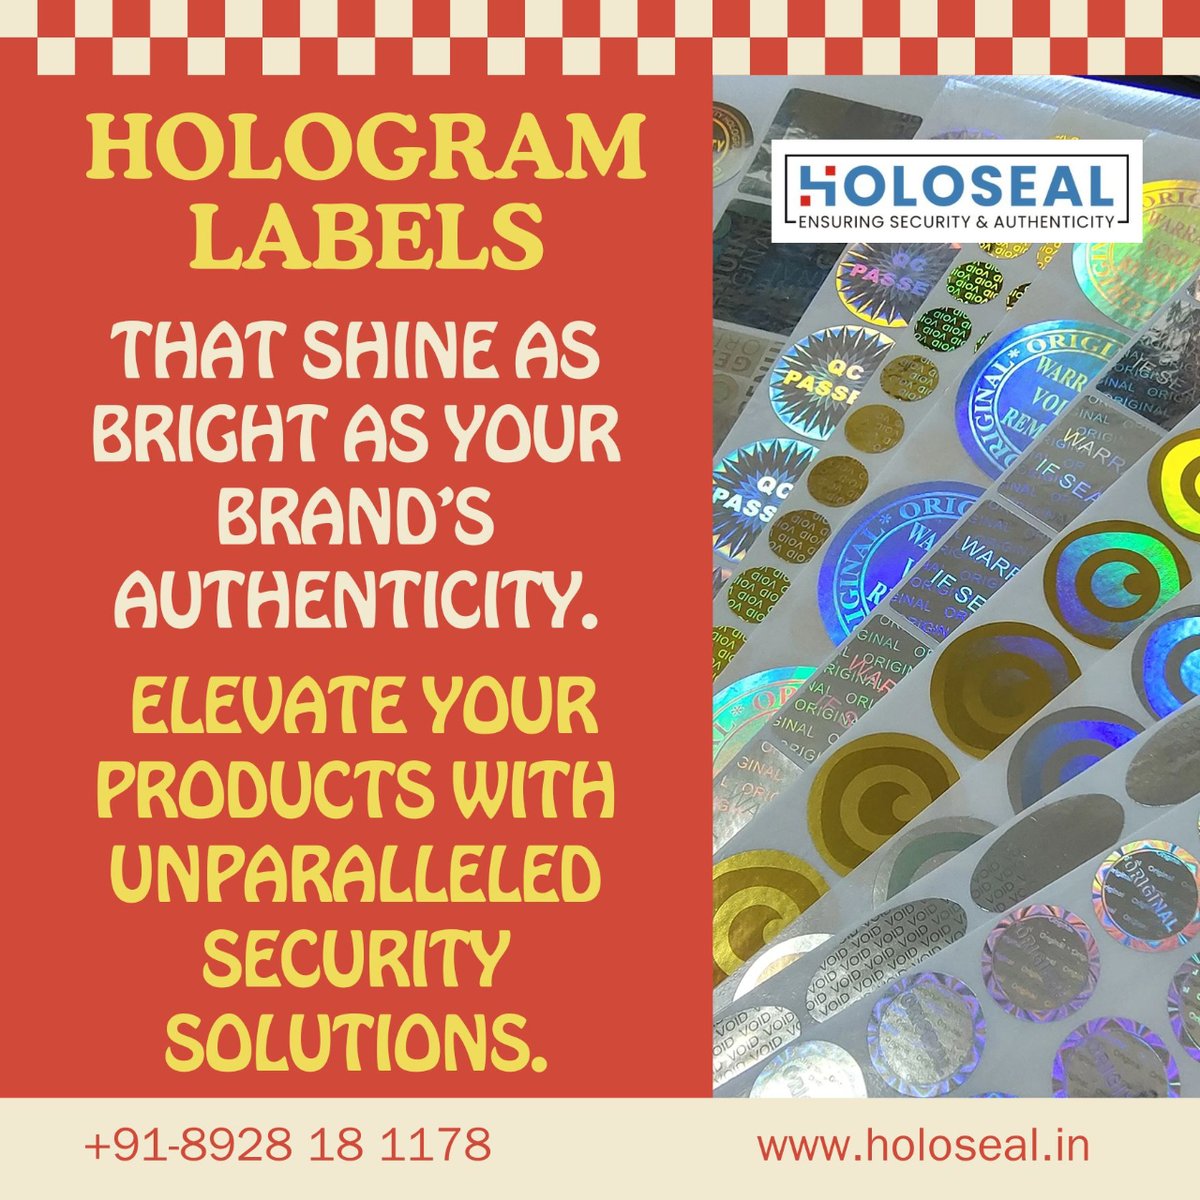 'Hologram labels that shine as bright as your brand’s authenticity. Elevate your products with unparalleled security solutions. #BrandAuthenticity #ProtectYourProducts #Holoseal'

i.mtr.cool/zyasjwnzrn